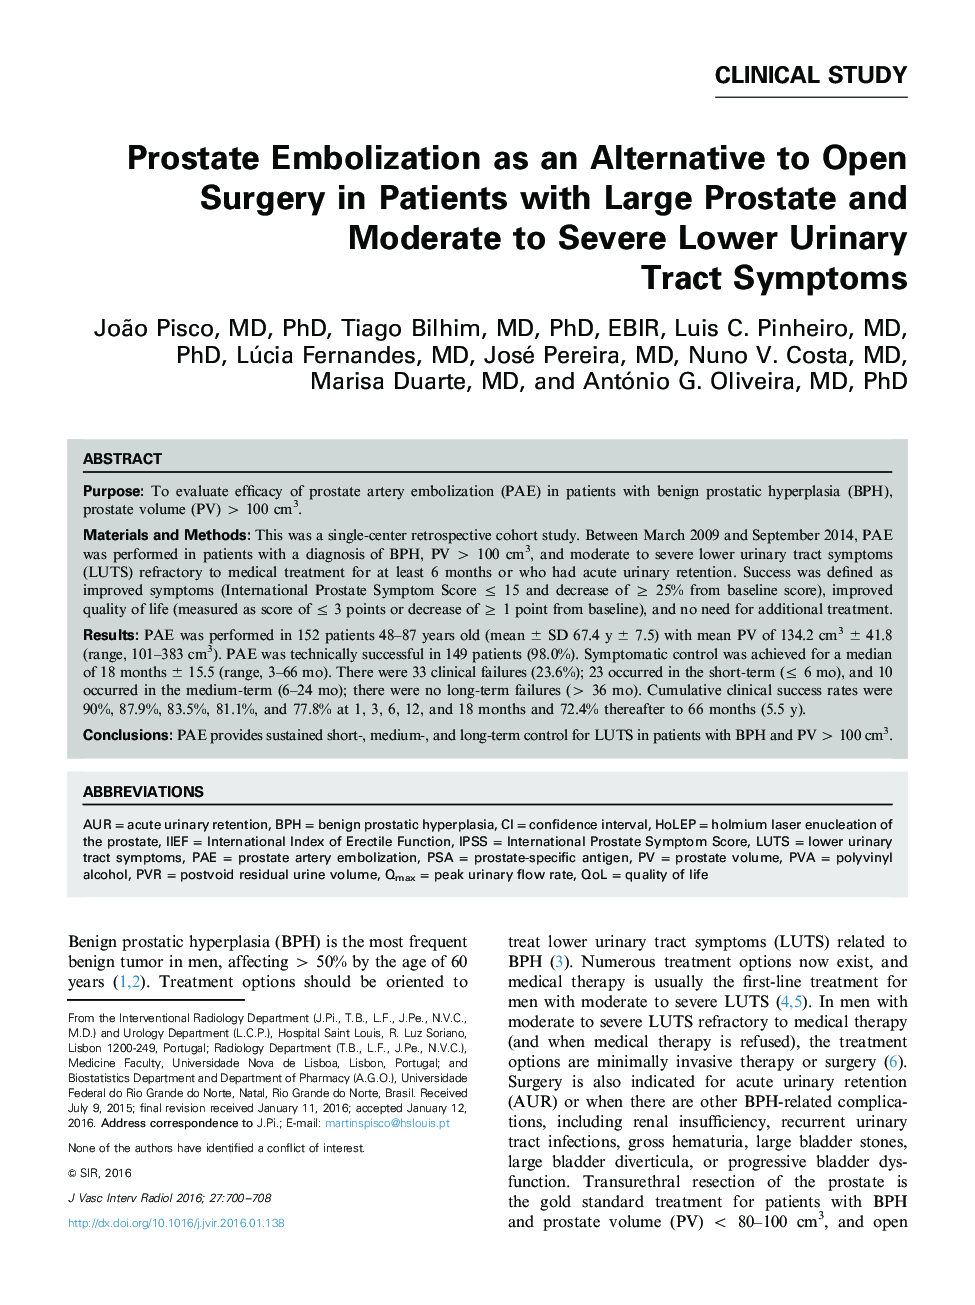 Prostate Embolization as an Alternative to Open Surgery in Patients with Large Prostate and Moderate to Severe Lower Urinary Tract Symptoms